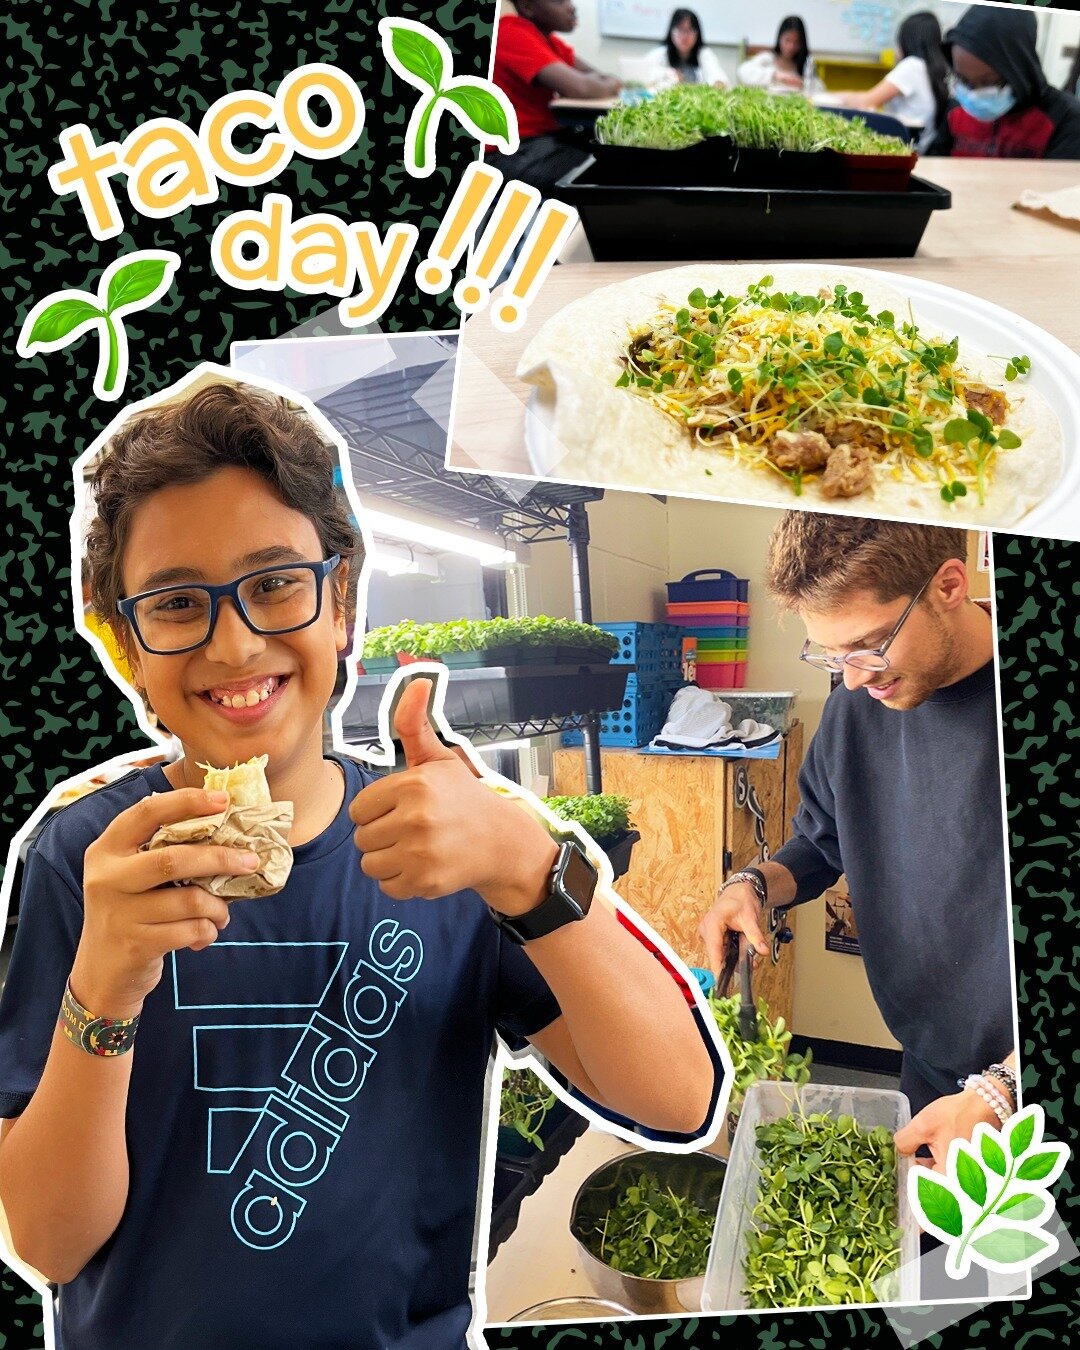 Did you know our 3 week curriculum ends with a taco party for your class? We can&rsquo;t lie, it&rsquo;s one of the highlights of the lesson plan. Nothing beats lunch made with the very microgreens grown right in your classroom! 

#bostonyouthfarmpro